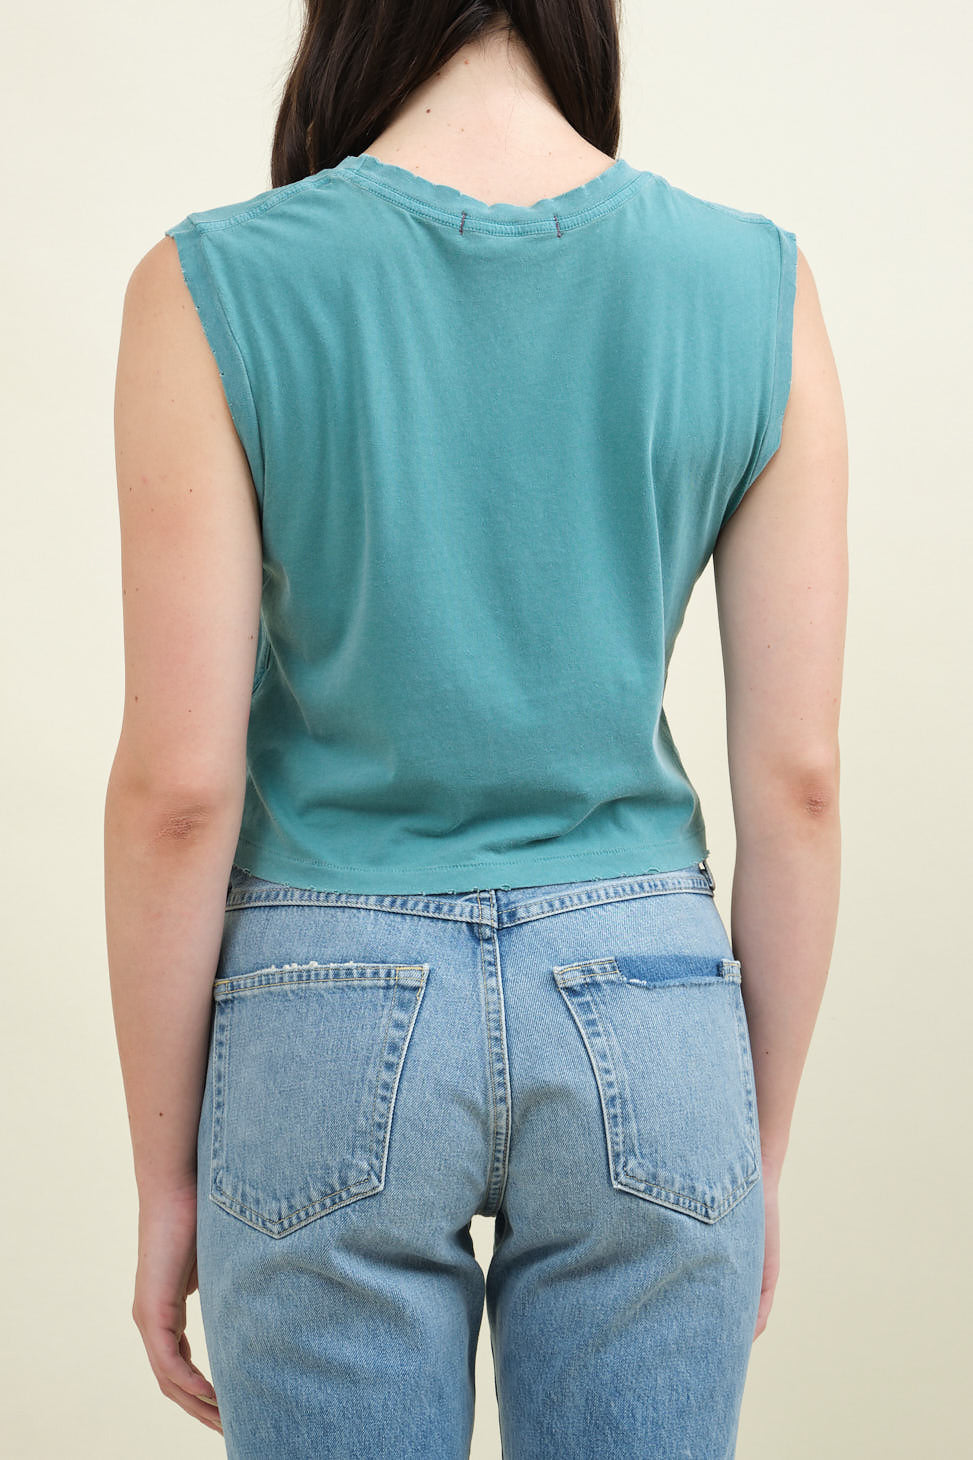 Back of Sleeveless Babe Tee in Teal